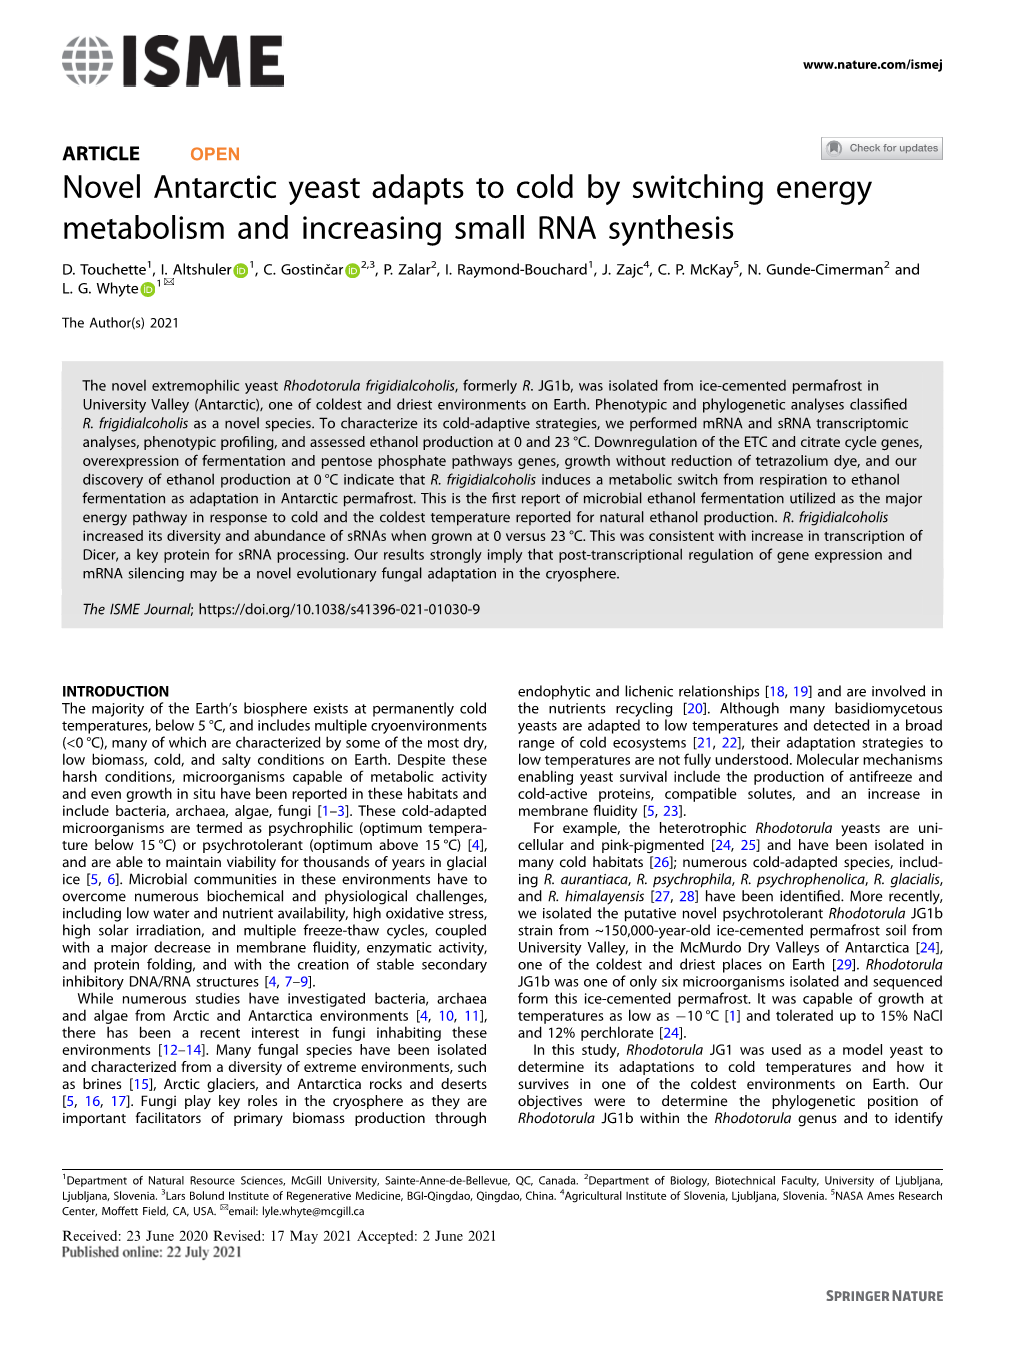 Novel Antarctic Yeast Adapts to Cold by Switching Energy Metabolism and Increasing Small RNA Synthesis 1 1 Č 2,3 2 1 4 5 2 D